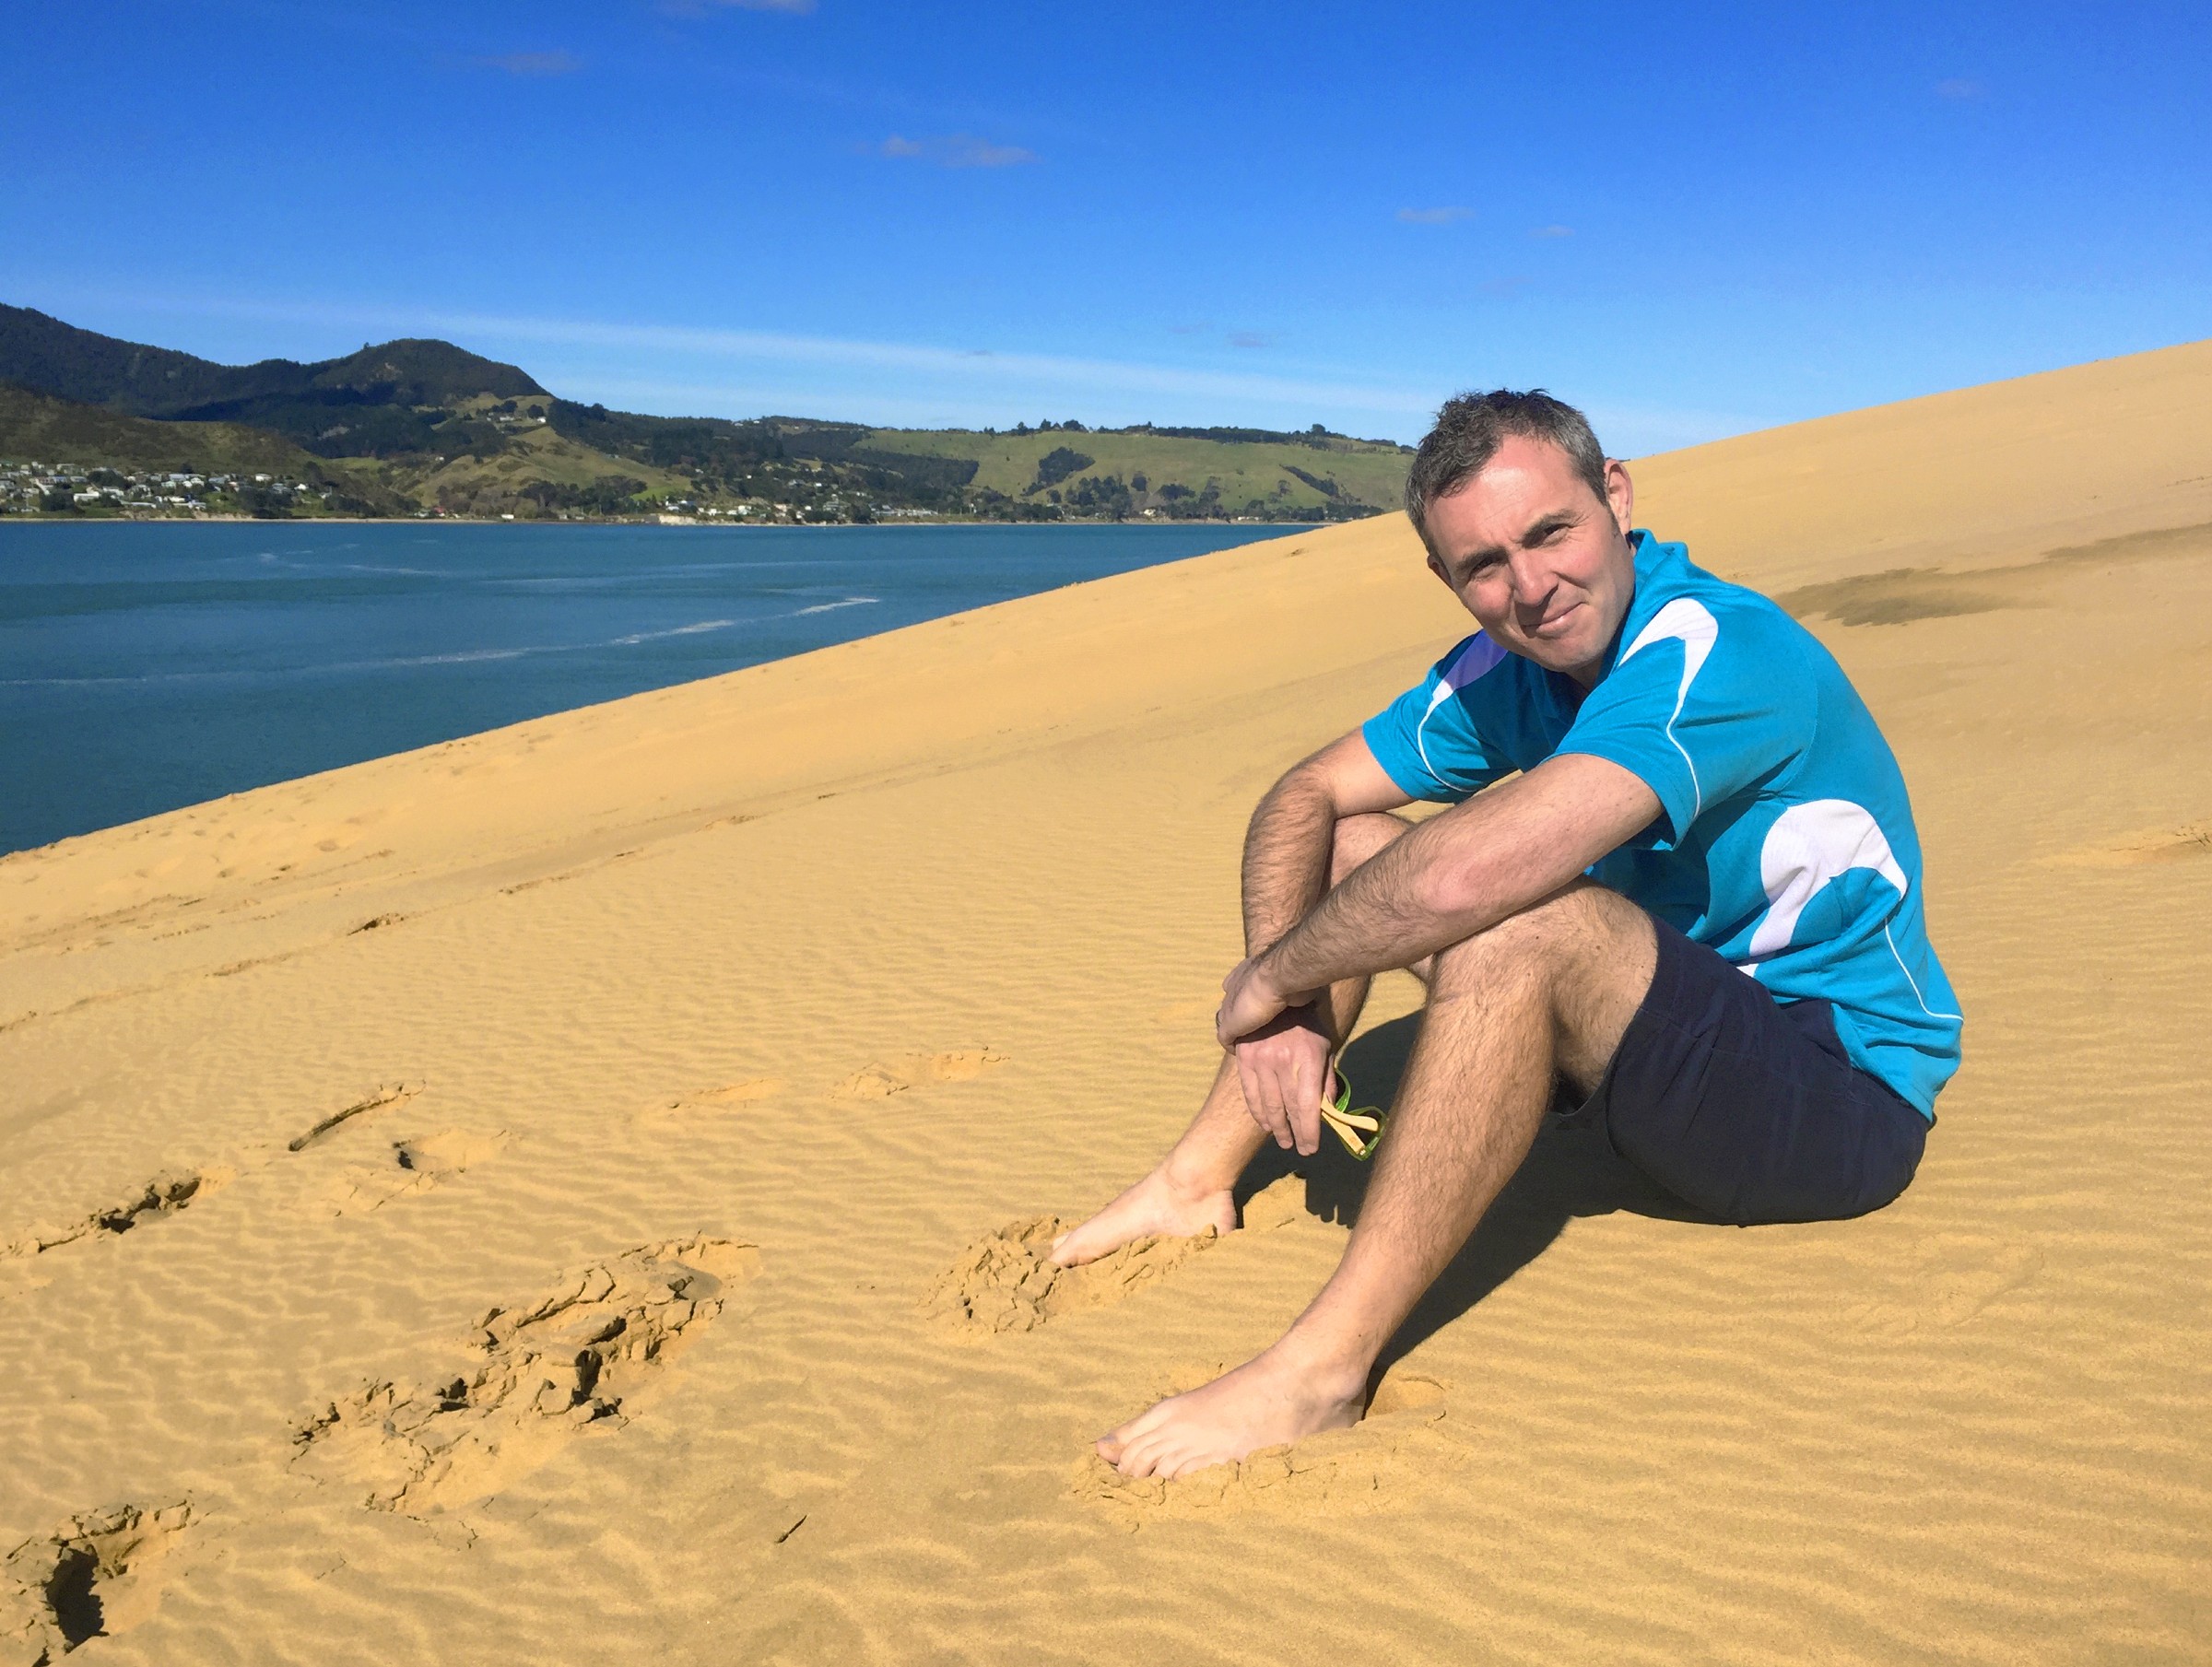 MoaTours guide Andrew on the sand dunes in the Hokianga harbour